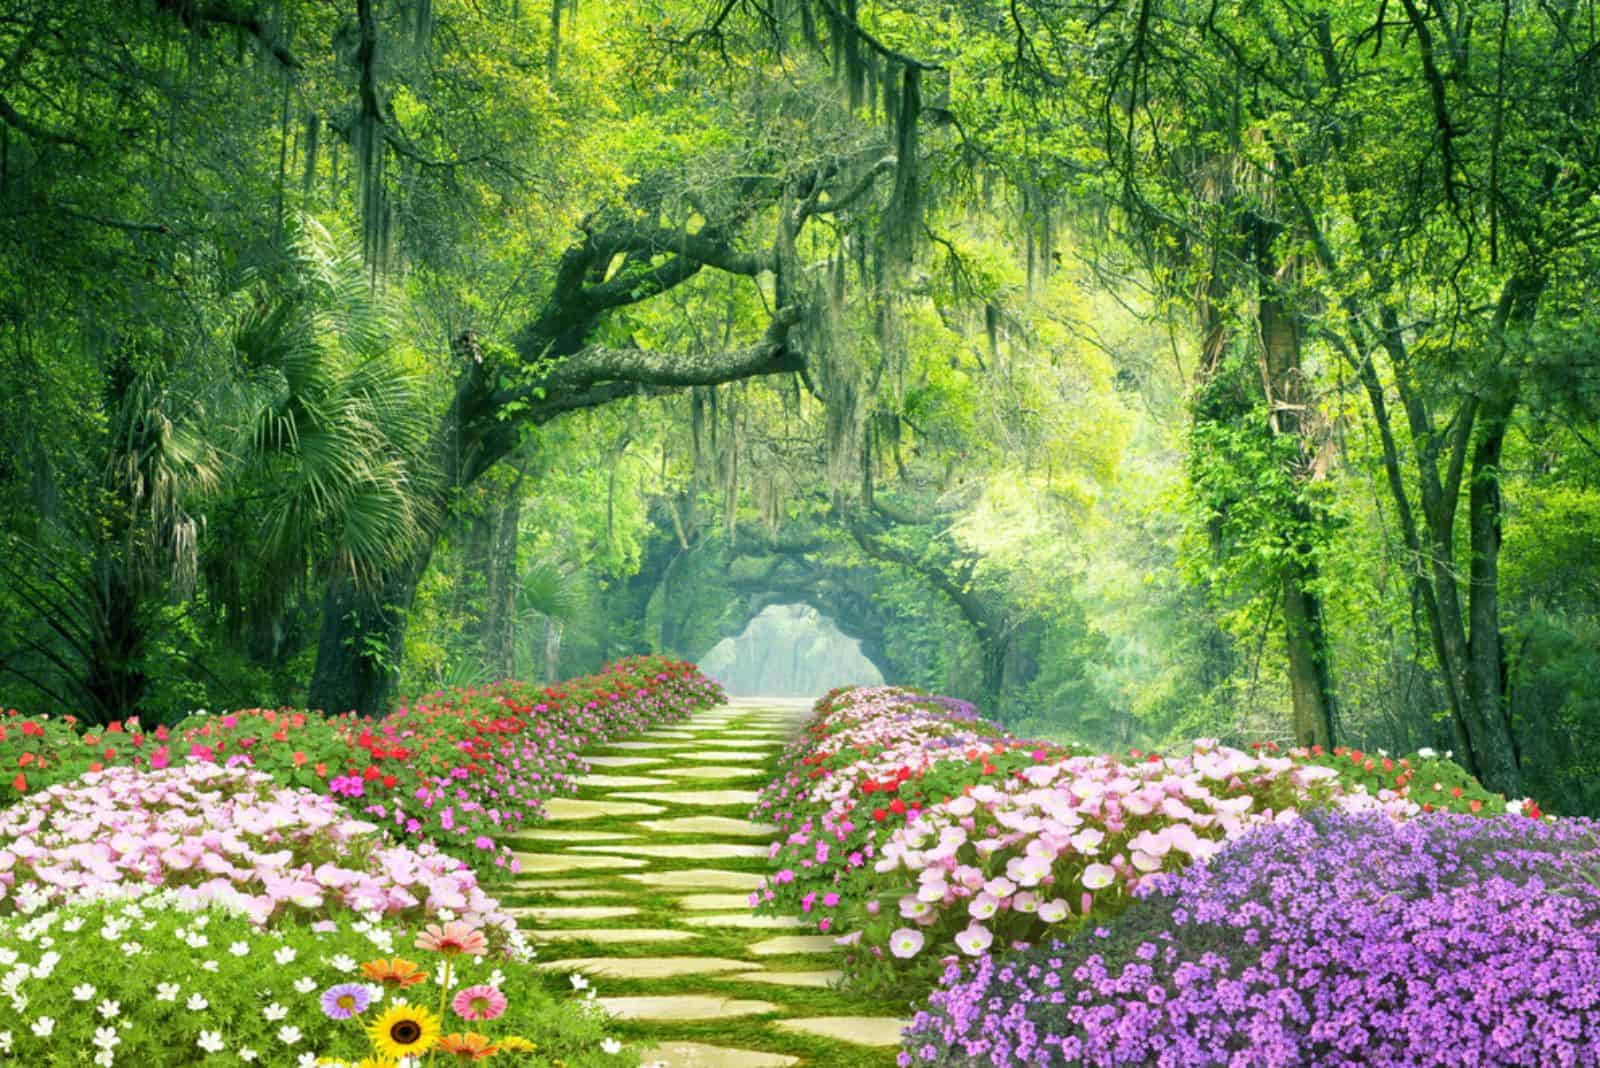 beautiful greenery in the forest garden with paths